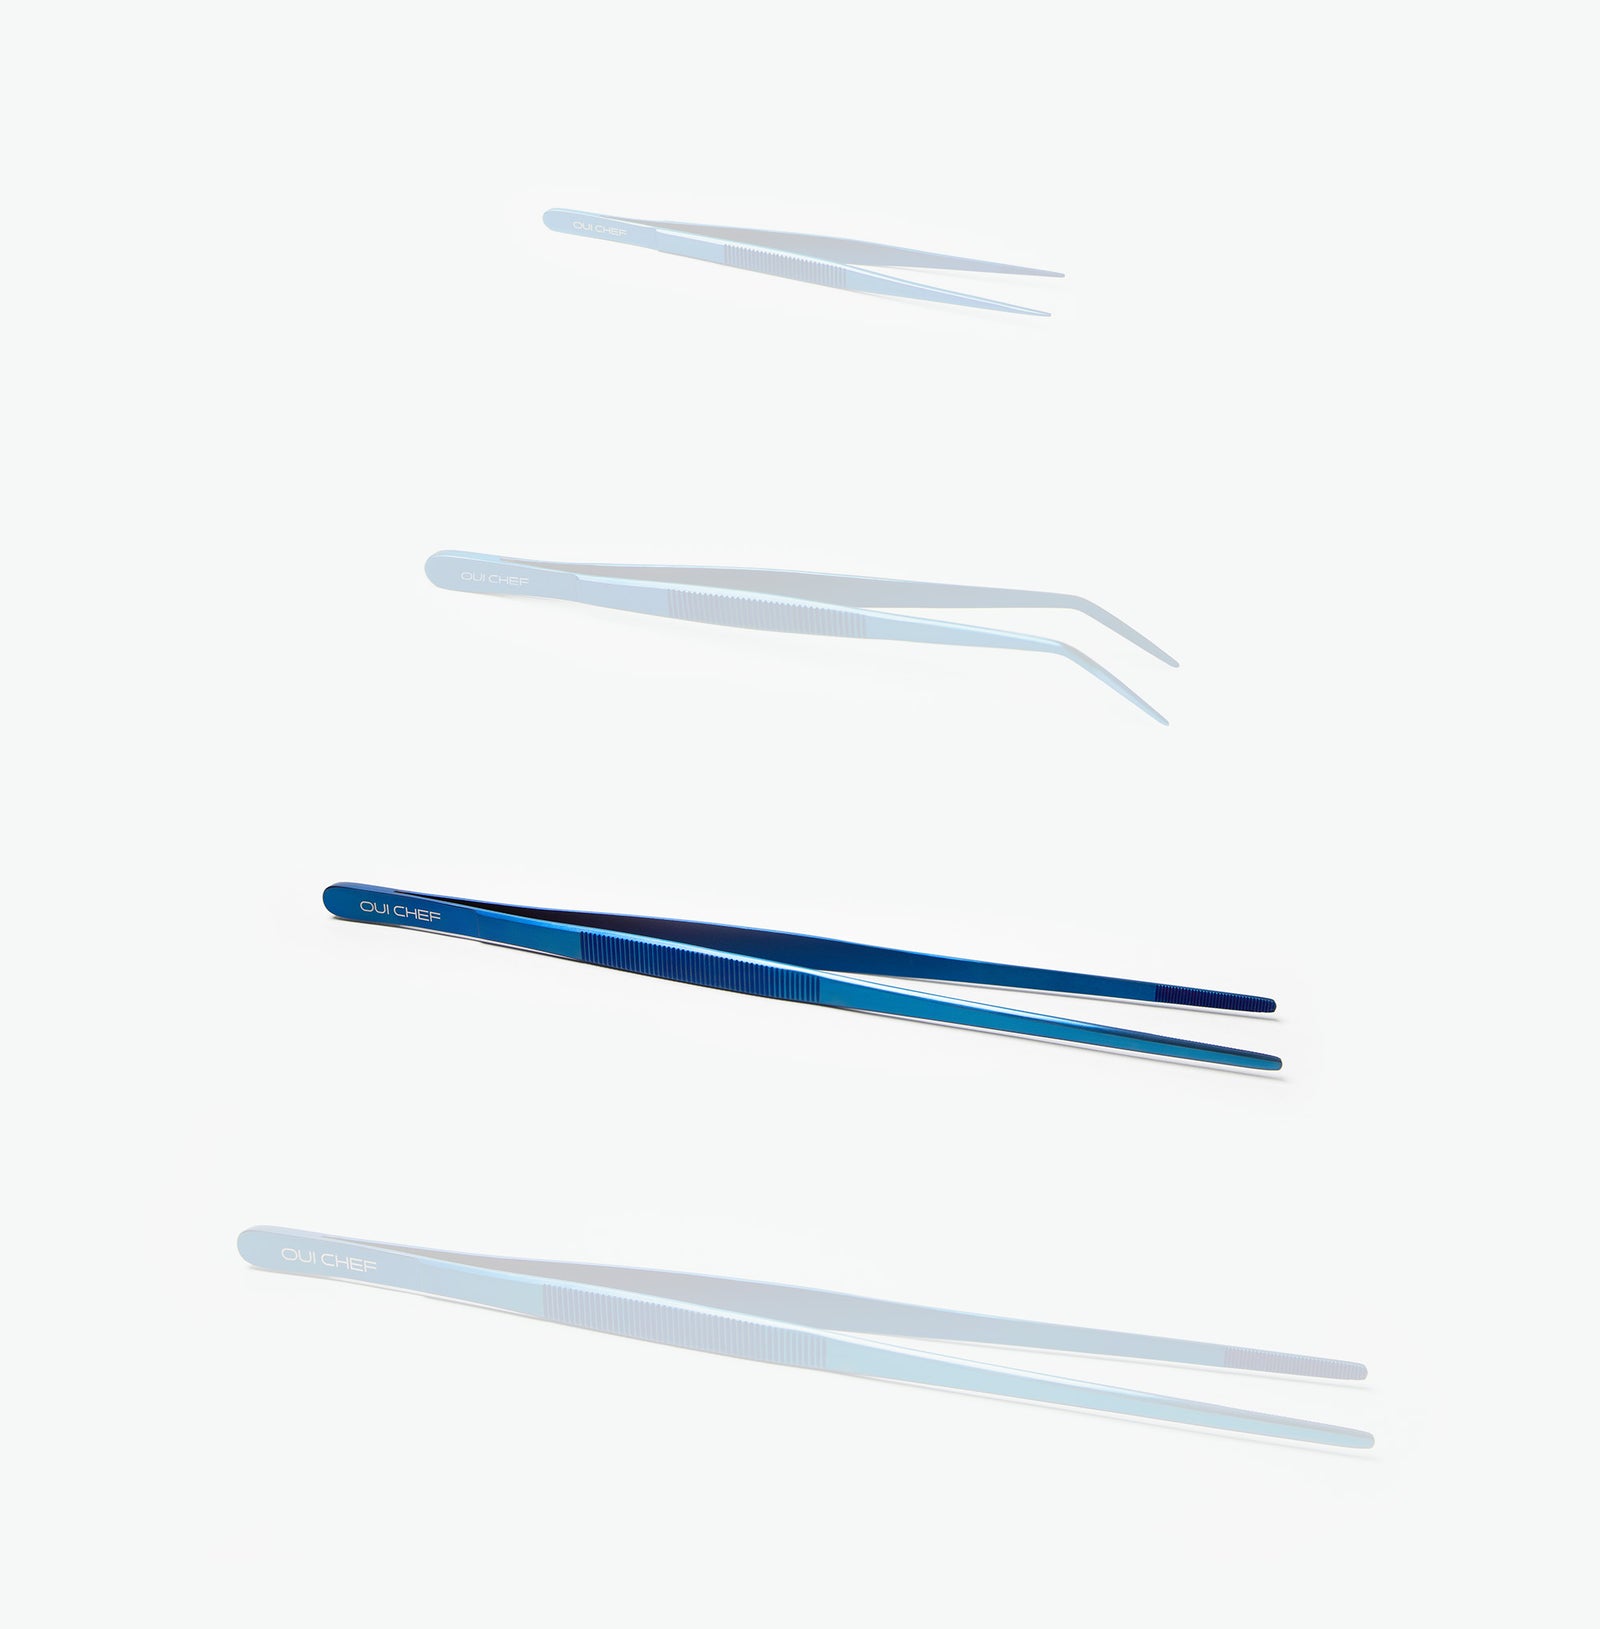 Size guide image showing different Oui Chef tweezers in blue metallic